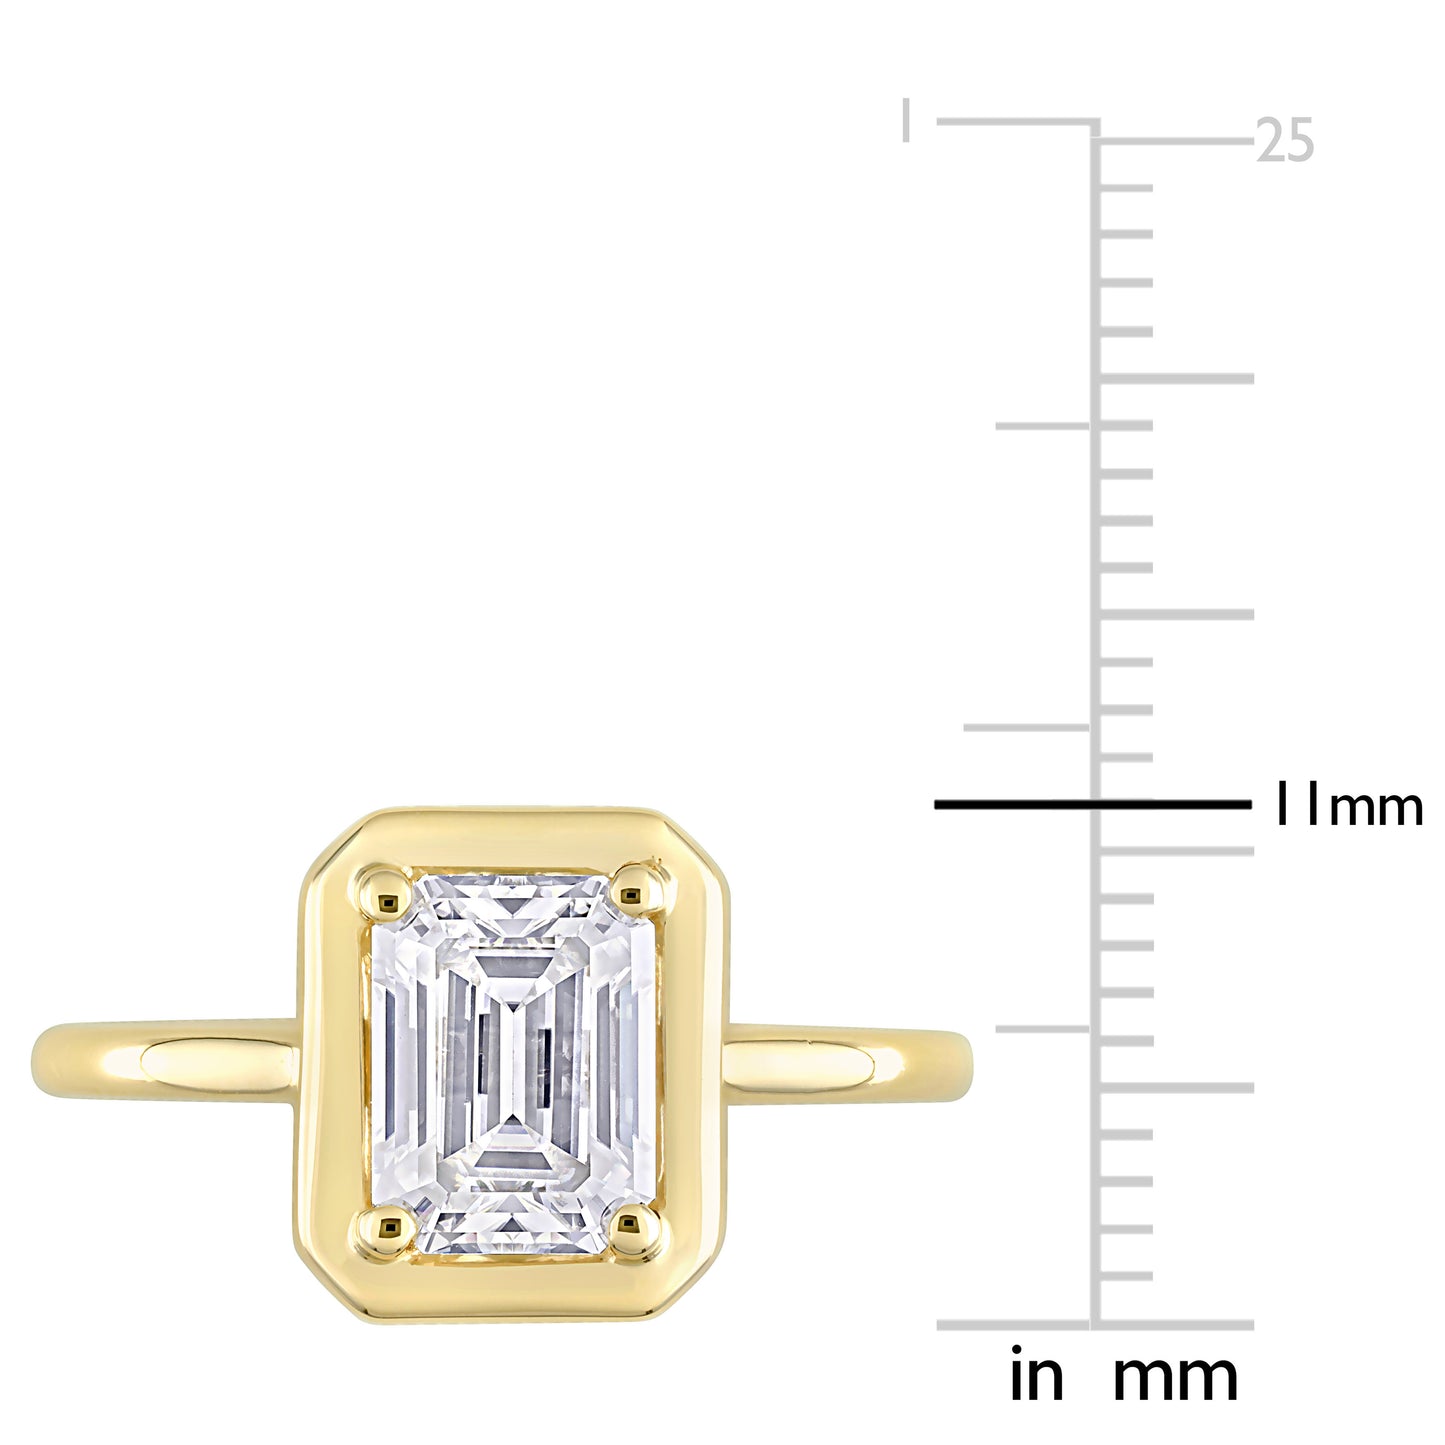 1 3/4ct Octagon Cut Moissanite Bezel Engagement Ring in 10k Yellow Gold